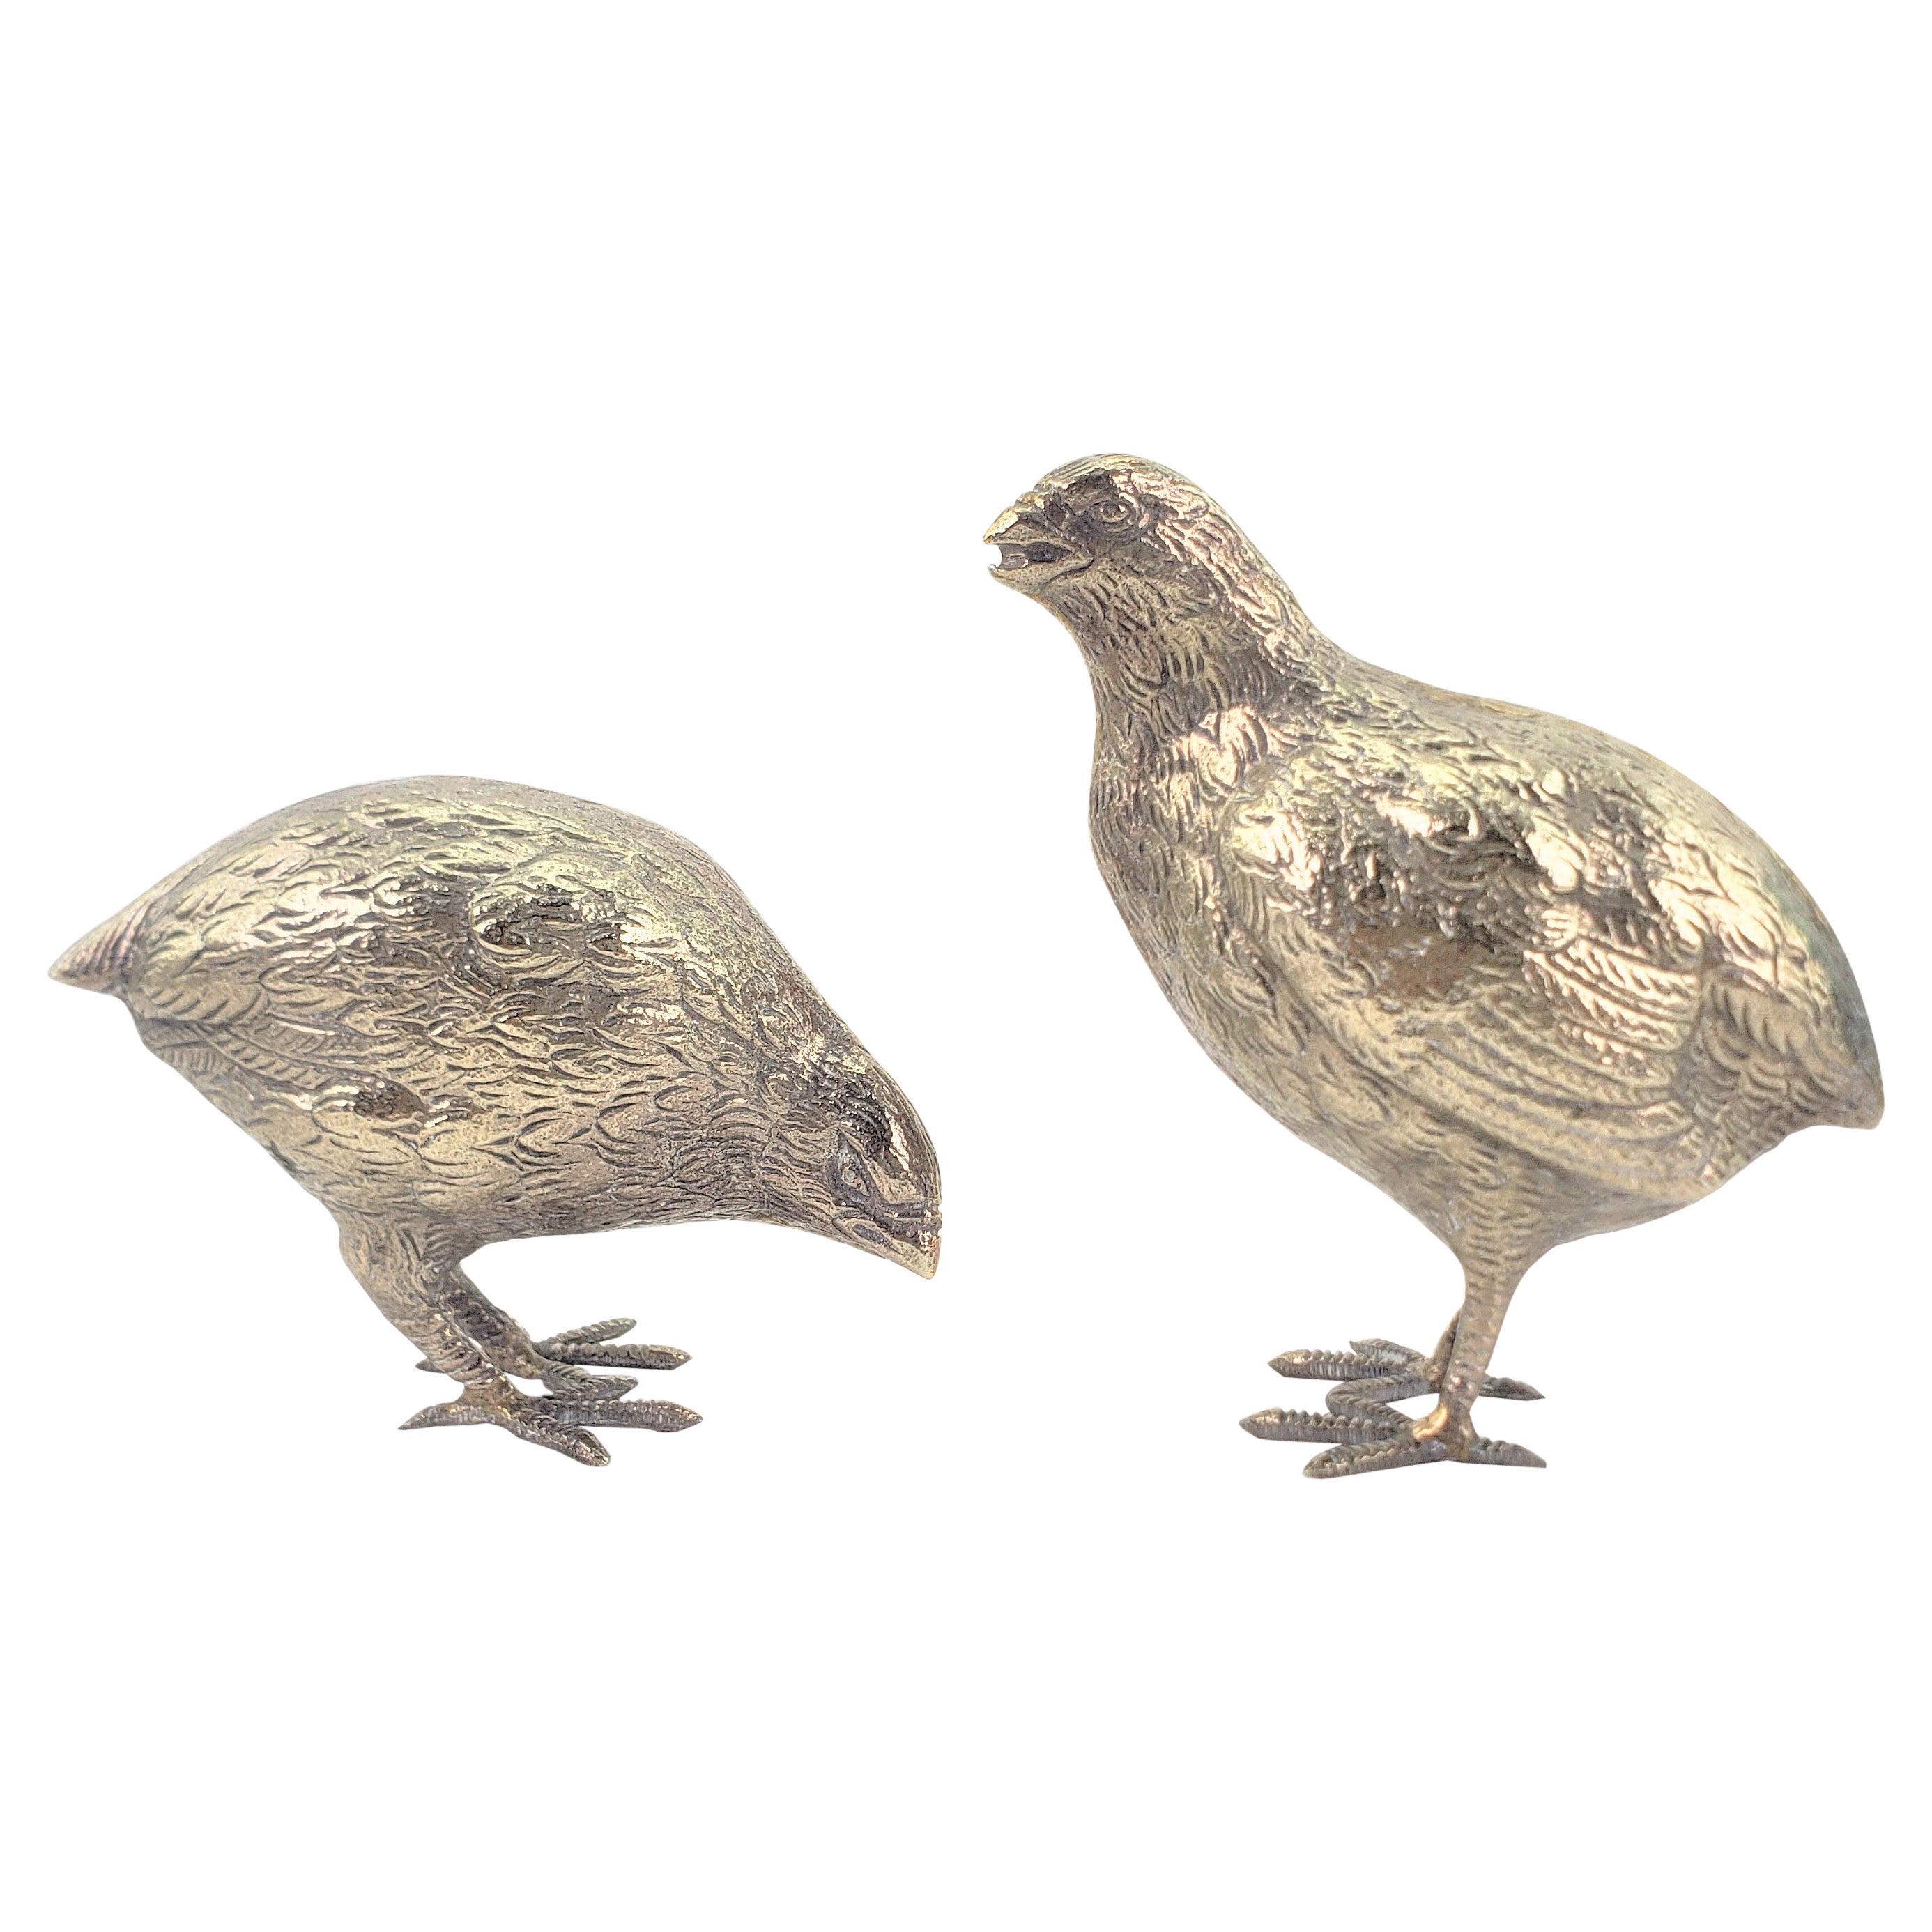 Pair of Antique Silver Plated Quail or Game Bird Decorative Sculptures